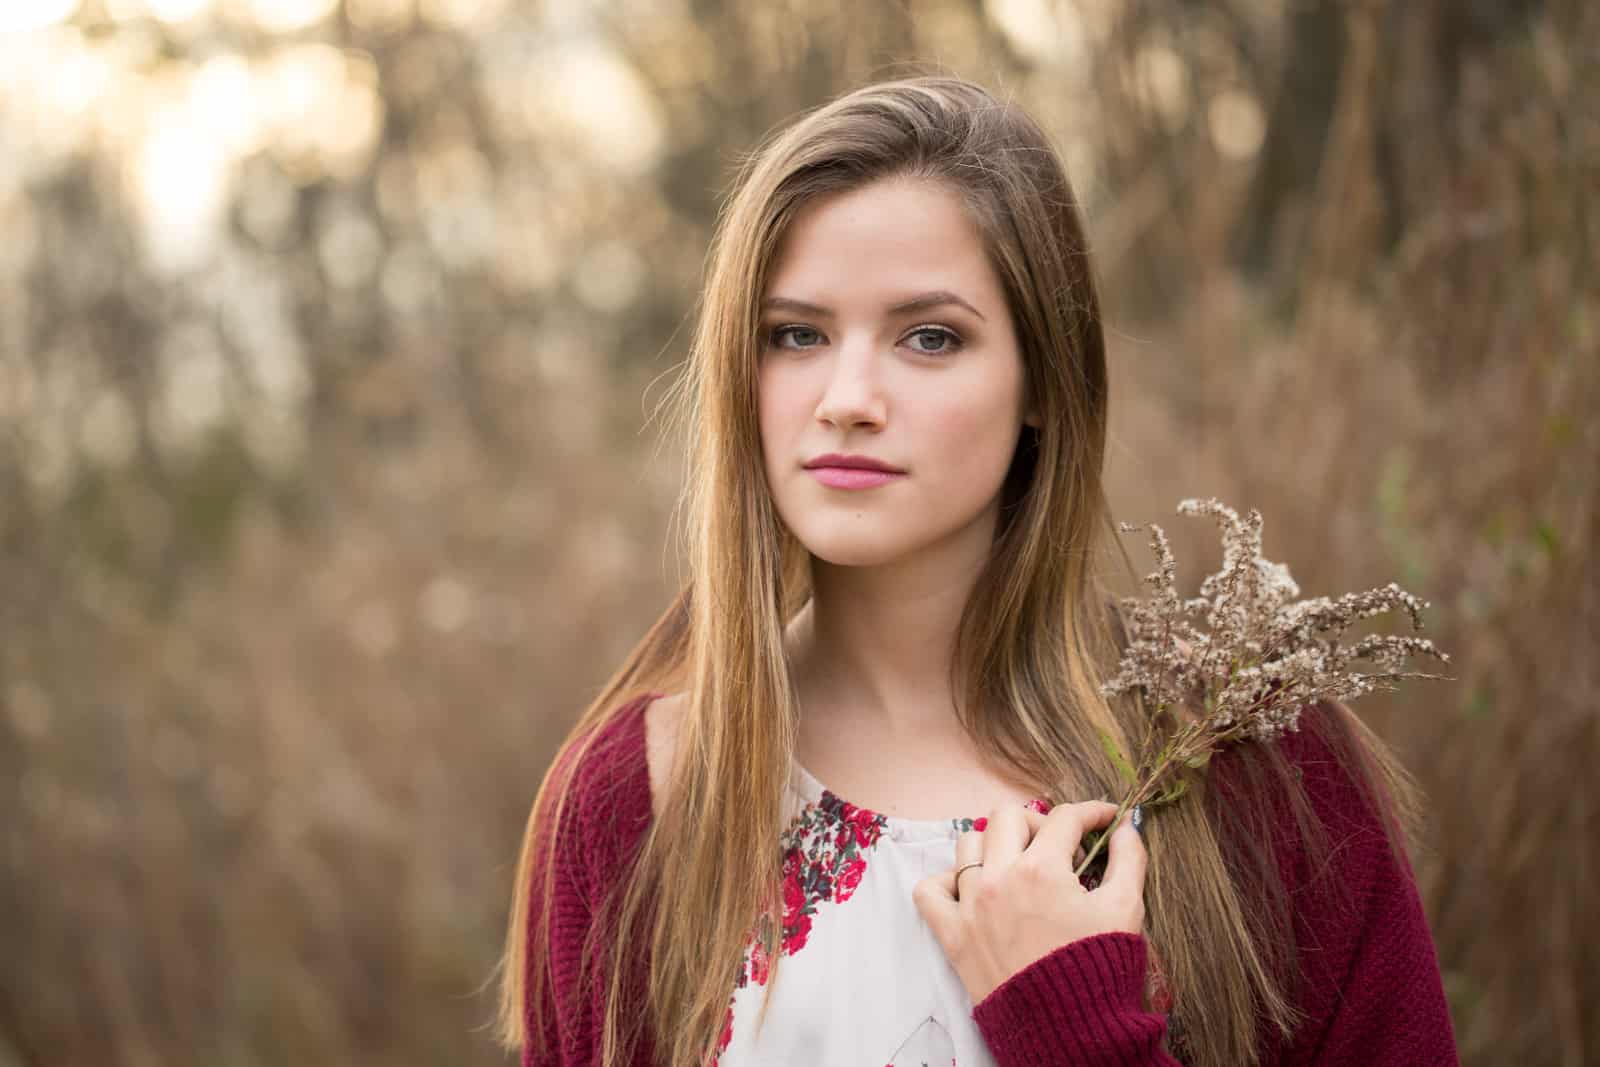 teen girl in burgandy sweater and flowered dress holds fuzzy flowered sprig in front of golden brown field.